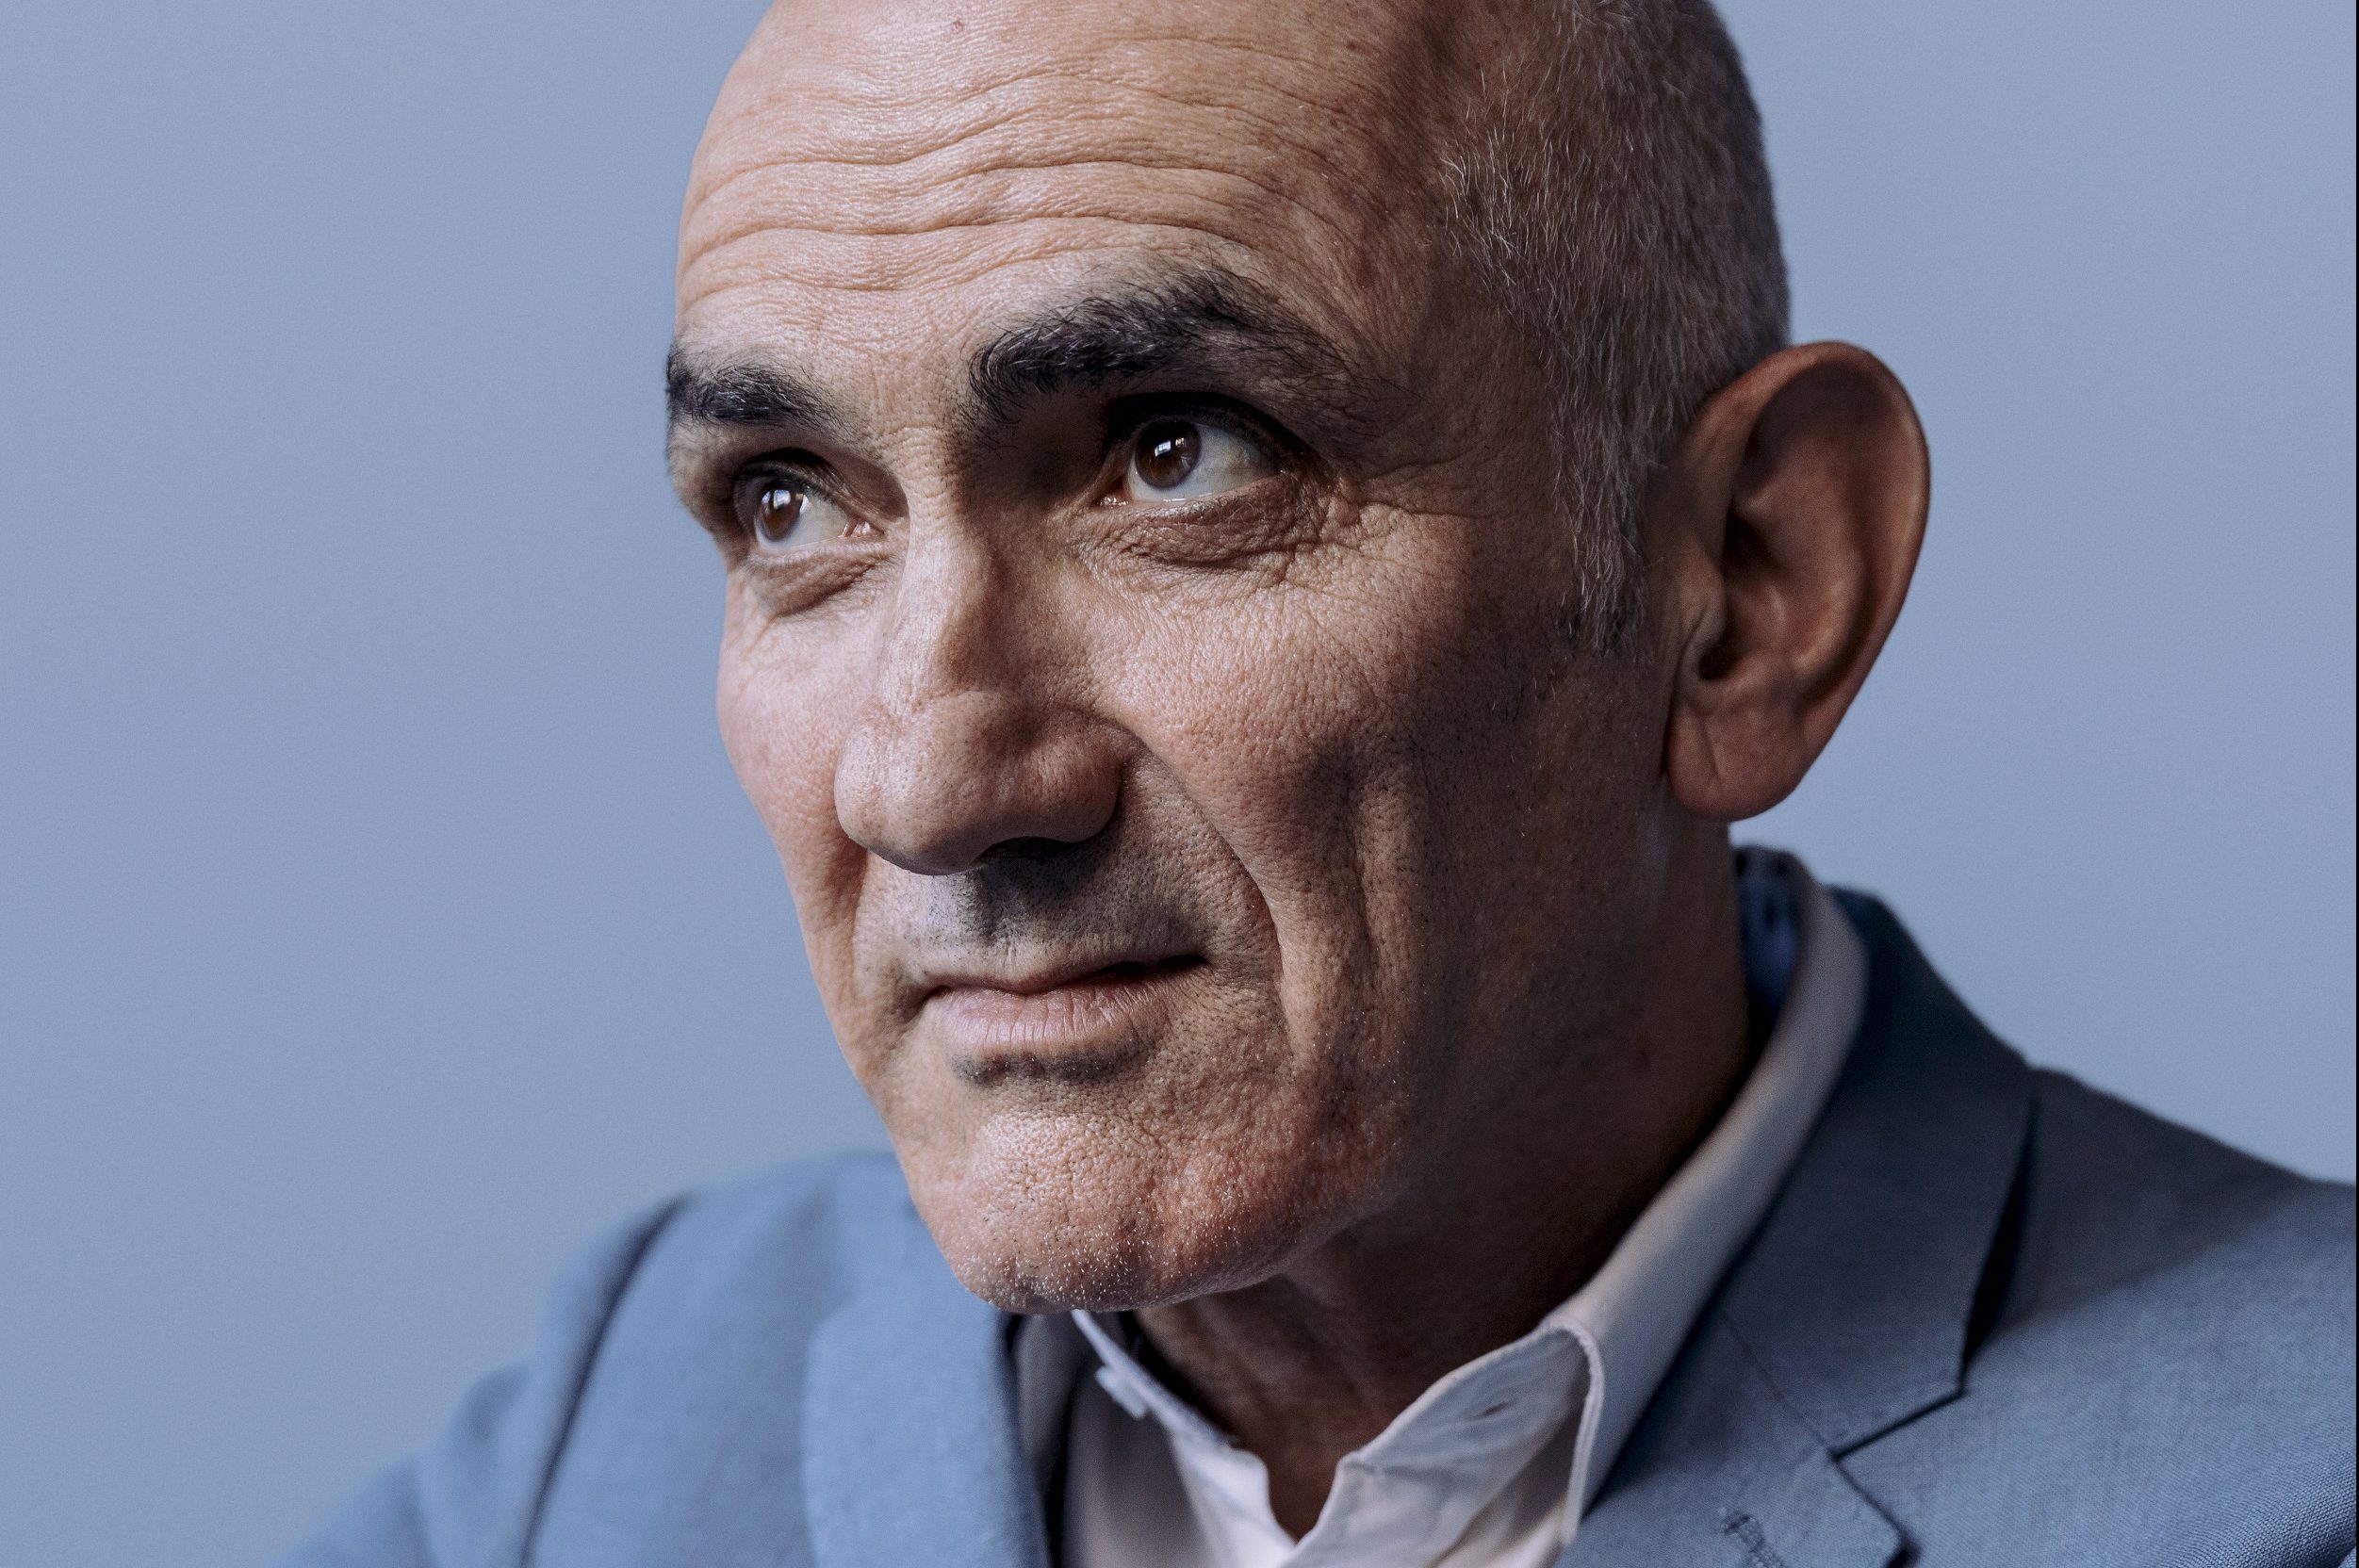 Paul Kelly, Julia Stone and Kee'ahn lead new concert honouring